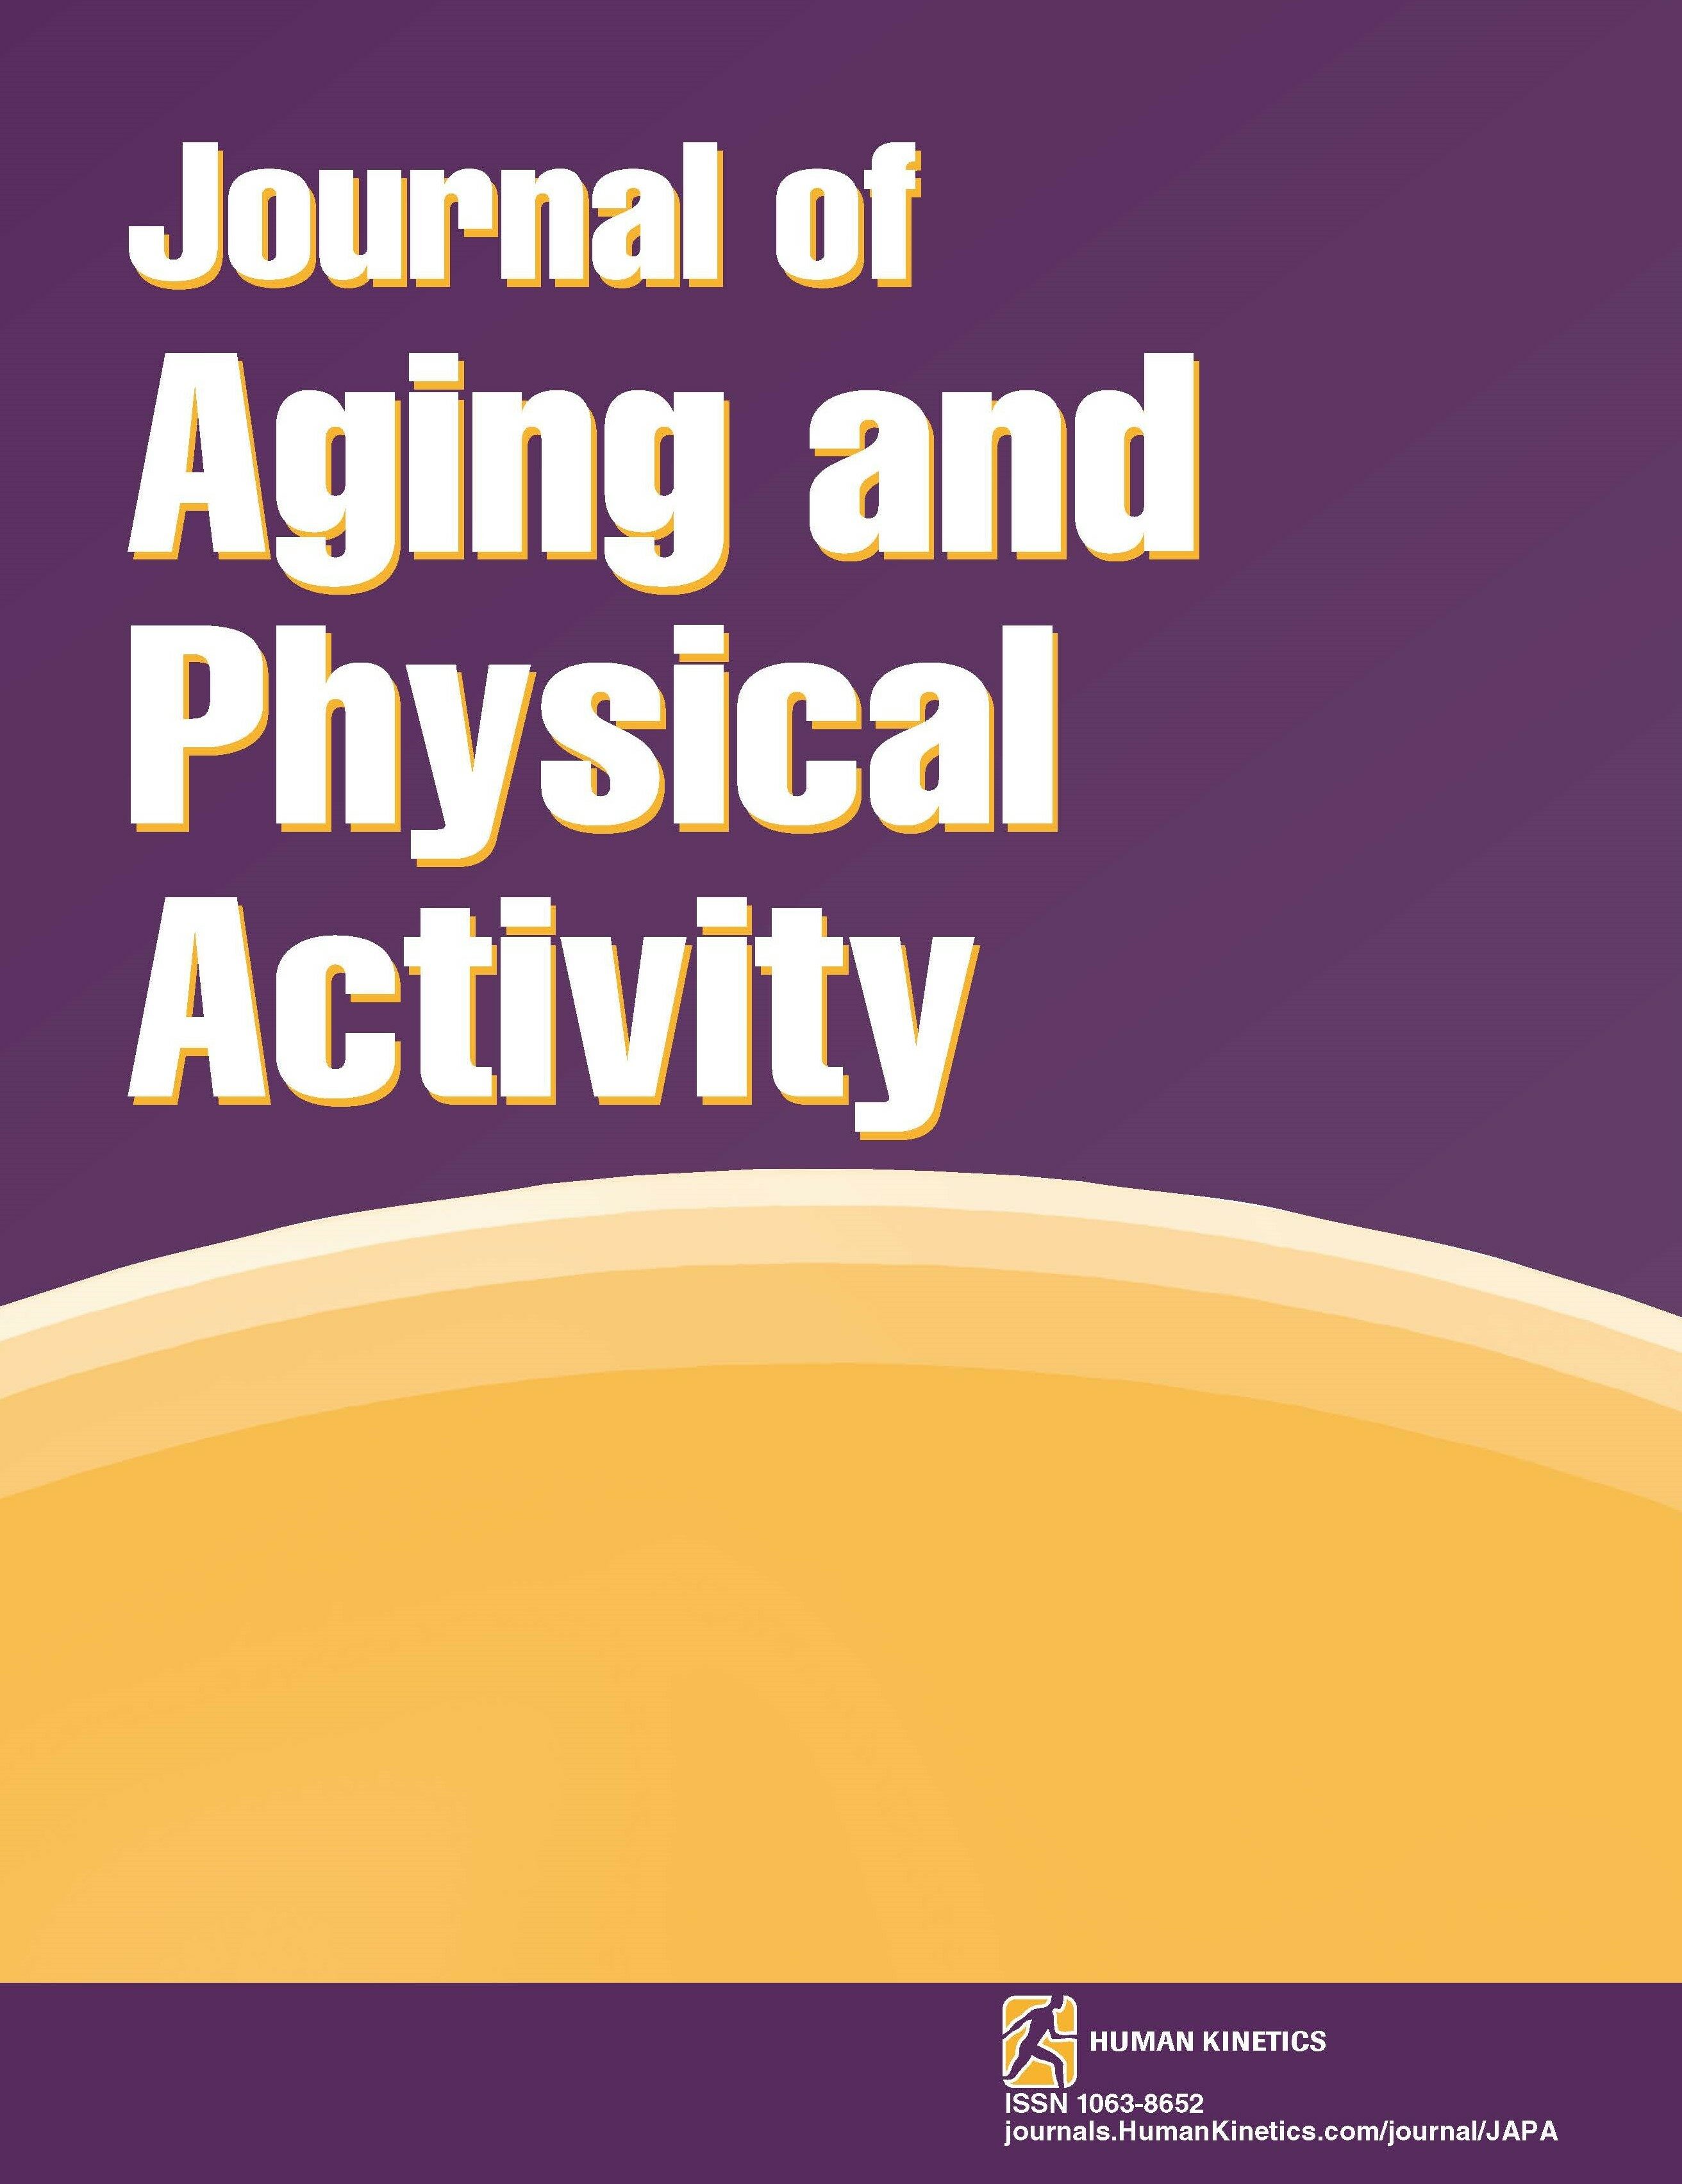 Effects of Motor Learning Interventions on Walking Performance and Physical Function in Older Adults With Cognitive Impairment and Dementia: A Systematic Review and Meta-Analysis